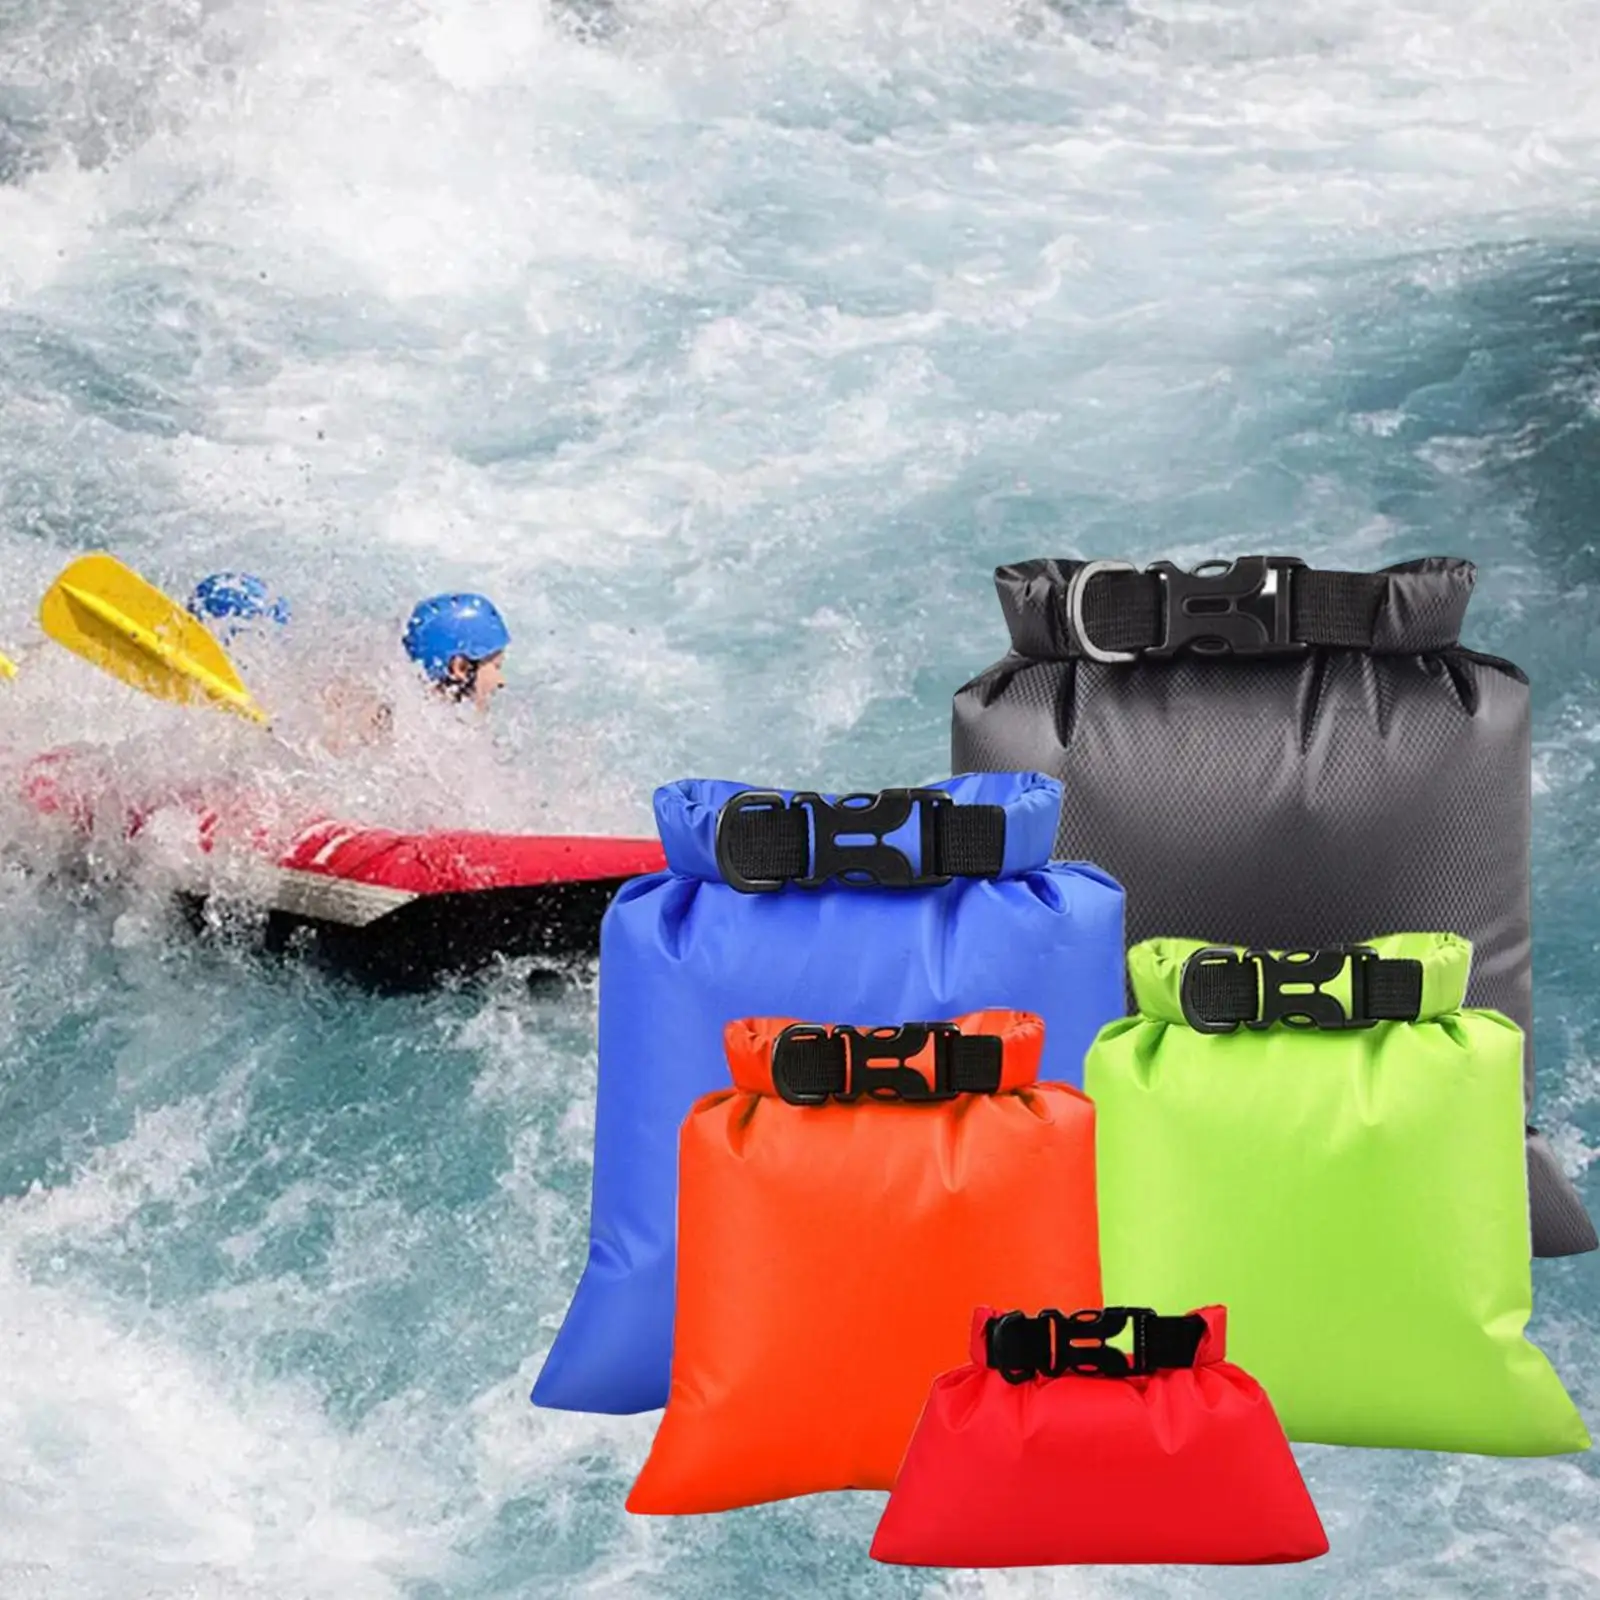 5Pcs Waterproof Dry Bags Lightweight Foldable Floating Dry Sacks Keeps Gear Dry for Swimming Outdoor Camping Travel Fishing Gym